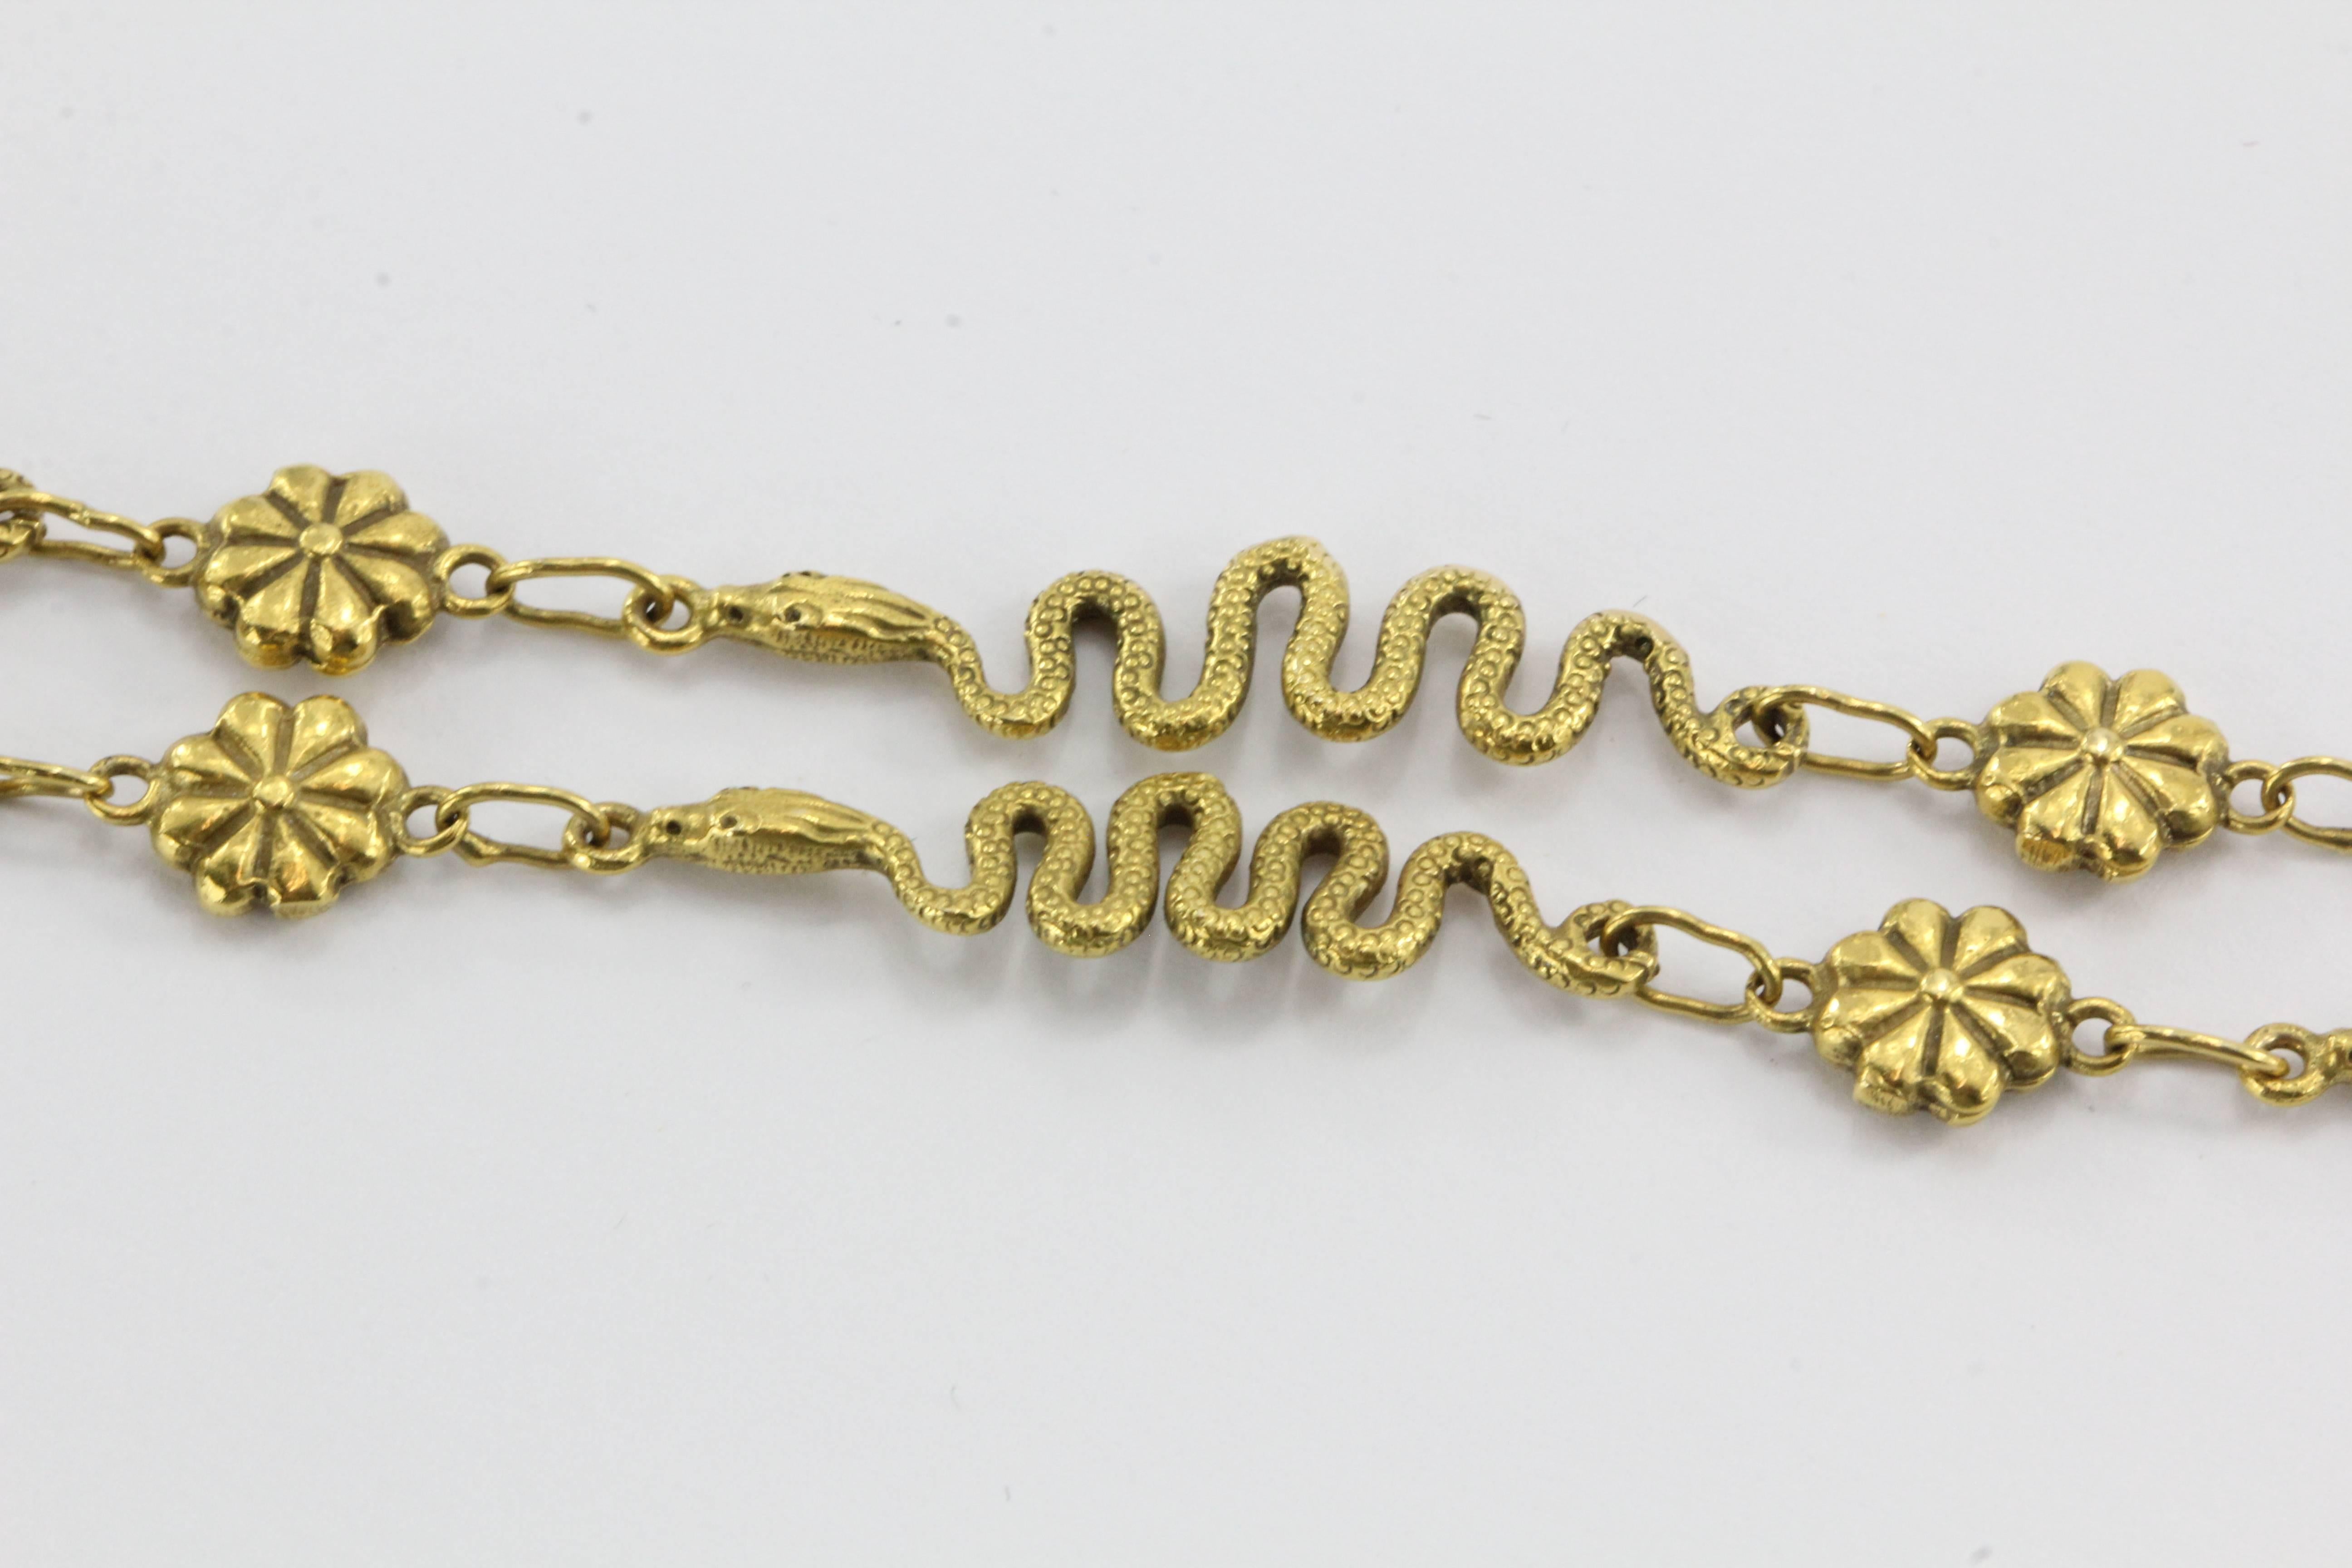 14K Gold Figural Snake Link & Serpent Necklace. The necklace is in excellent estate condition and ready to wear. It is hallmarked 14K on the clasp. There are ten 1